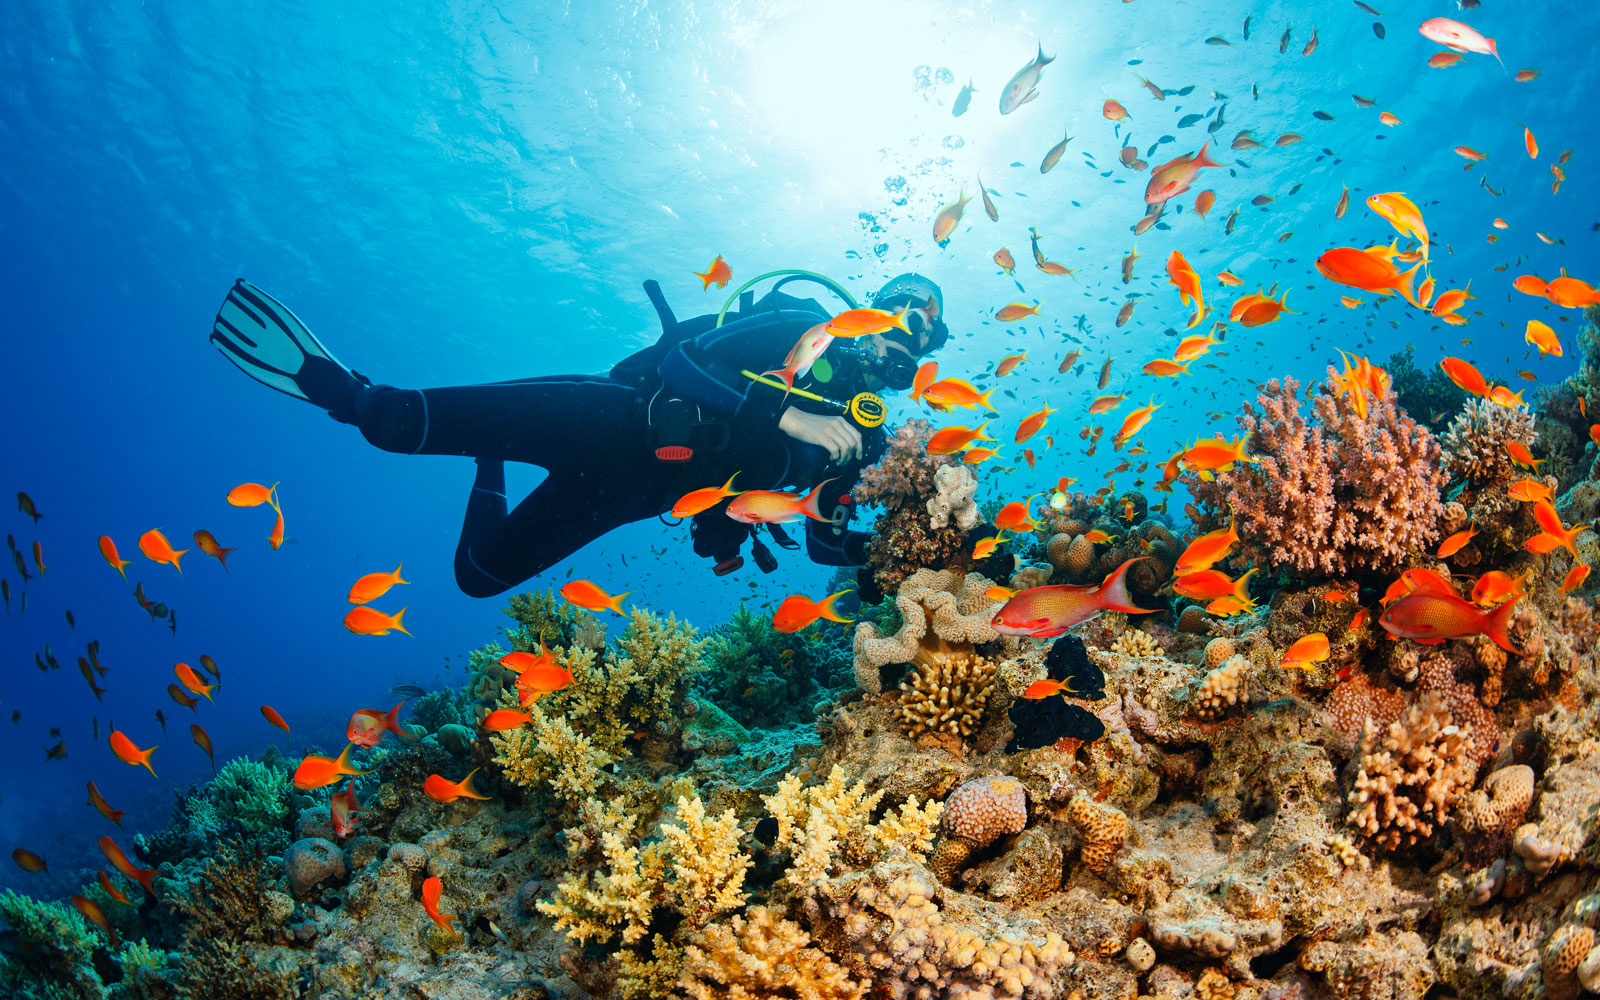 diver in a coral reef full of fish